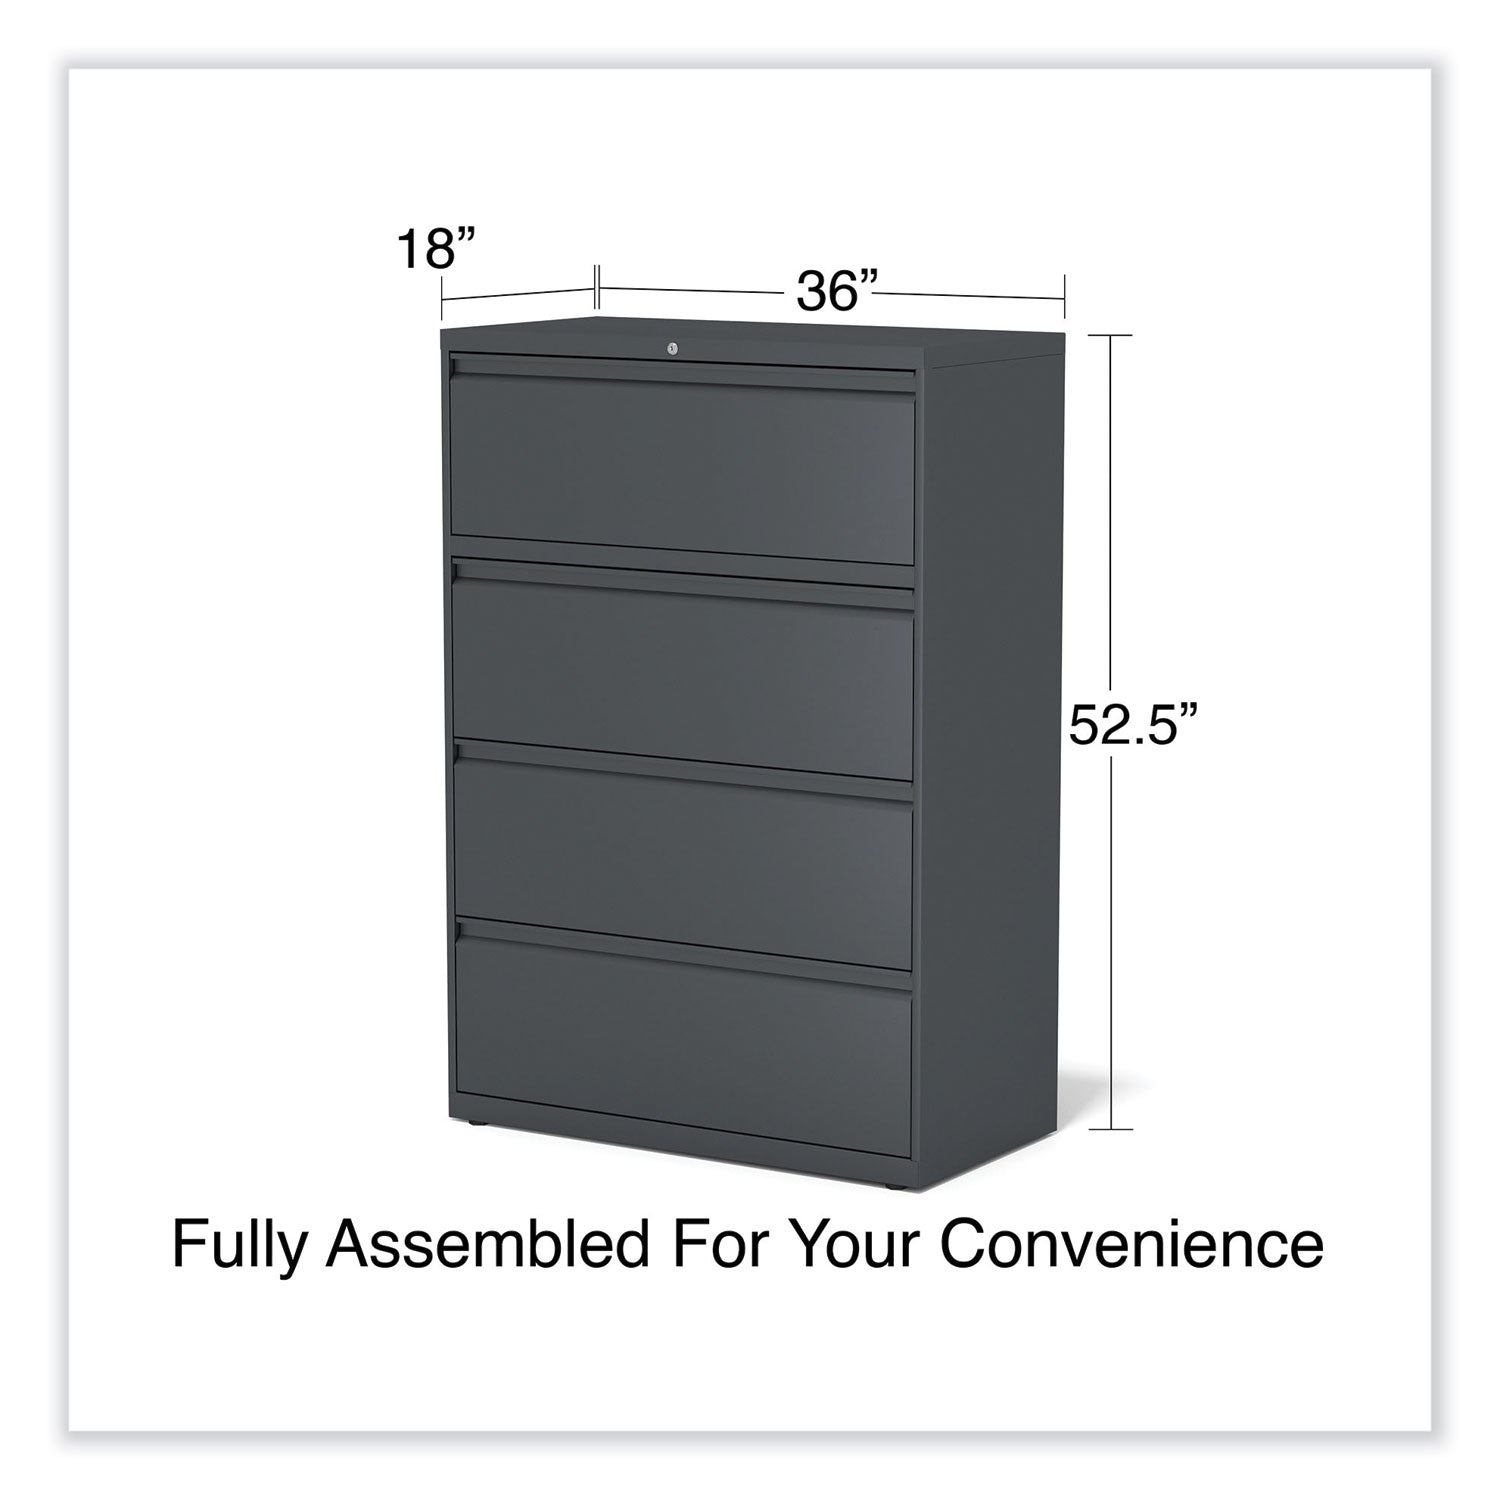 lateral-file-4-legal-letter-a4-a5-size-file-drawers-charcoal-36-x-1863-x-525_alehlf3654cc - 6